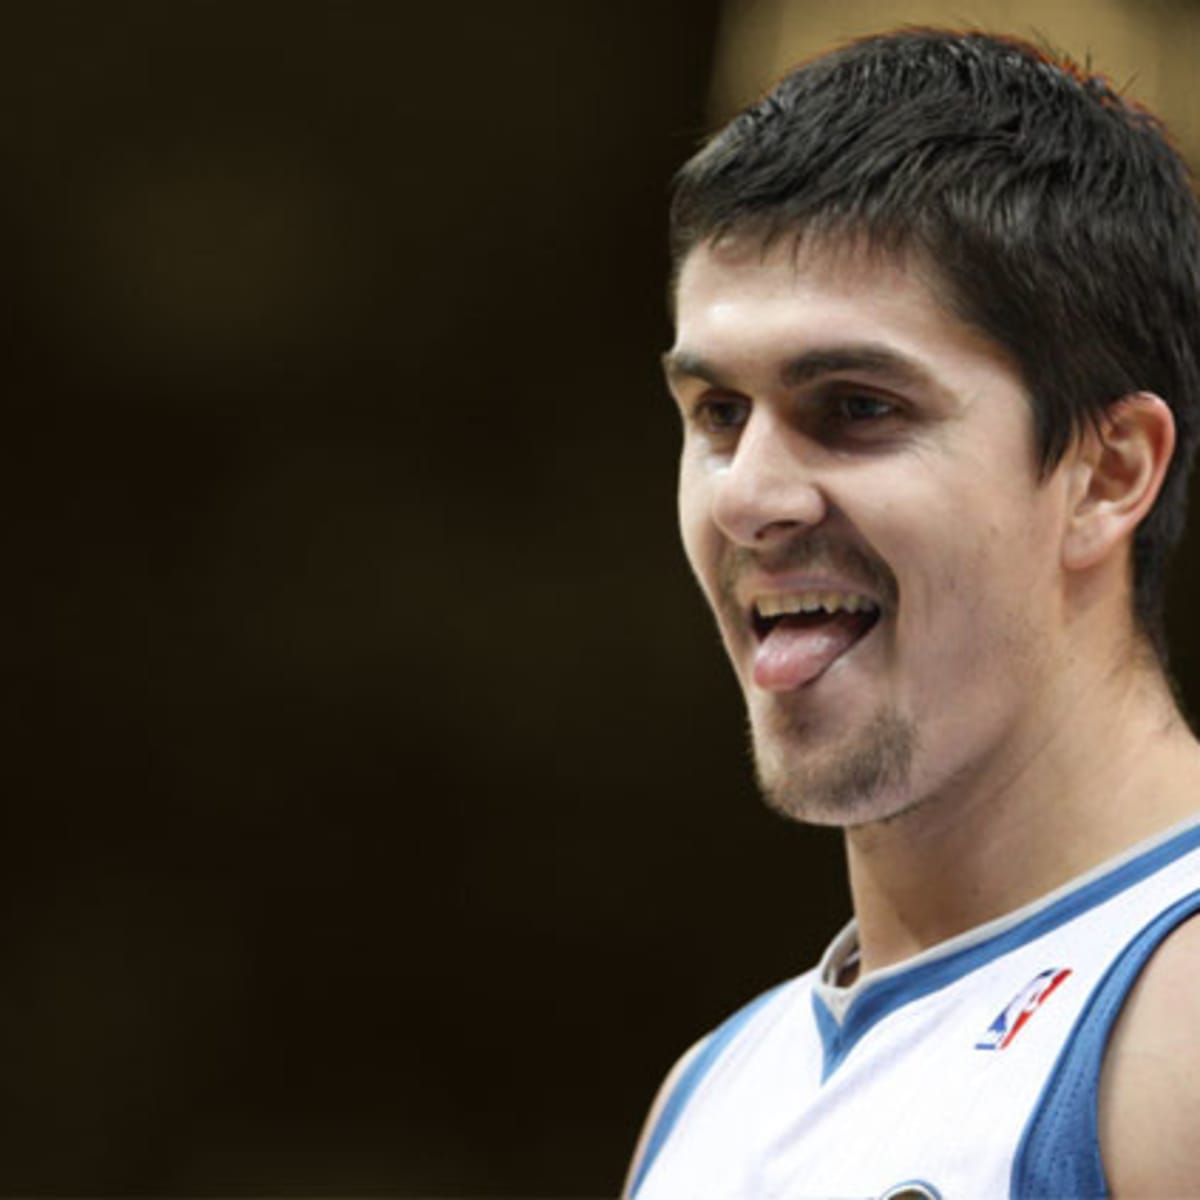 Do you think that a player like Darko Milicic (an unproven